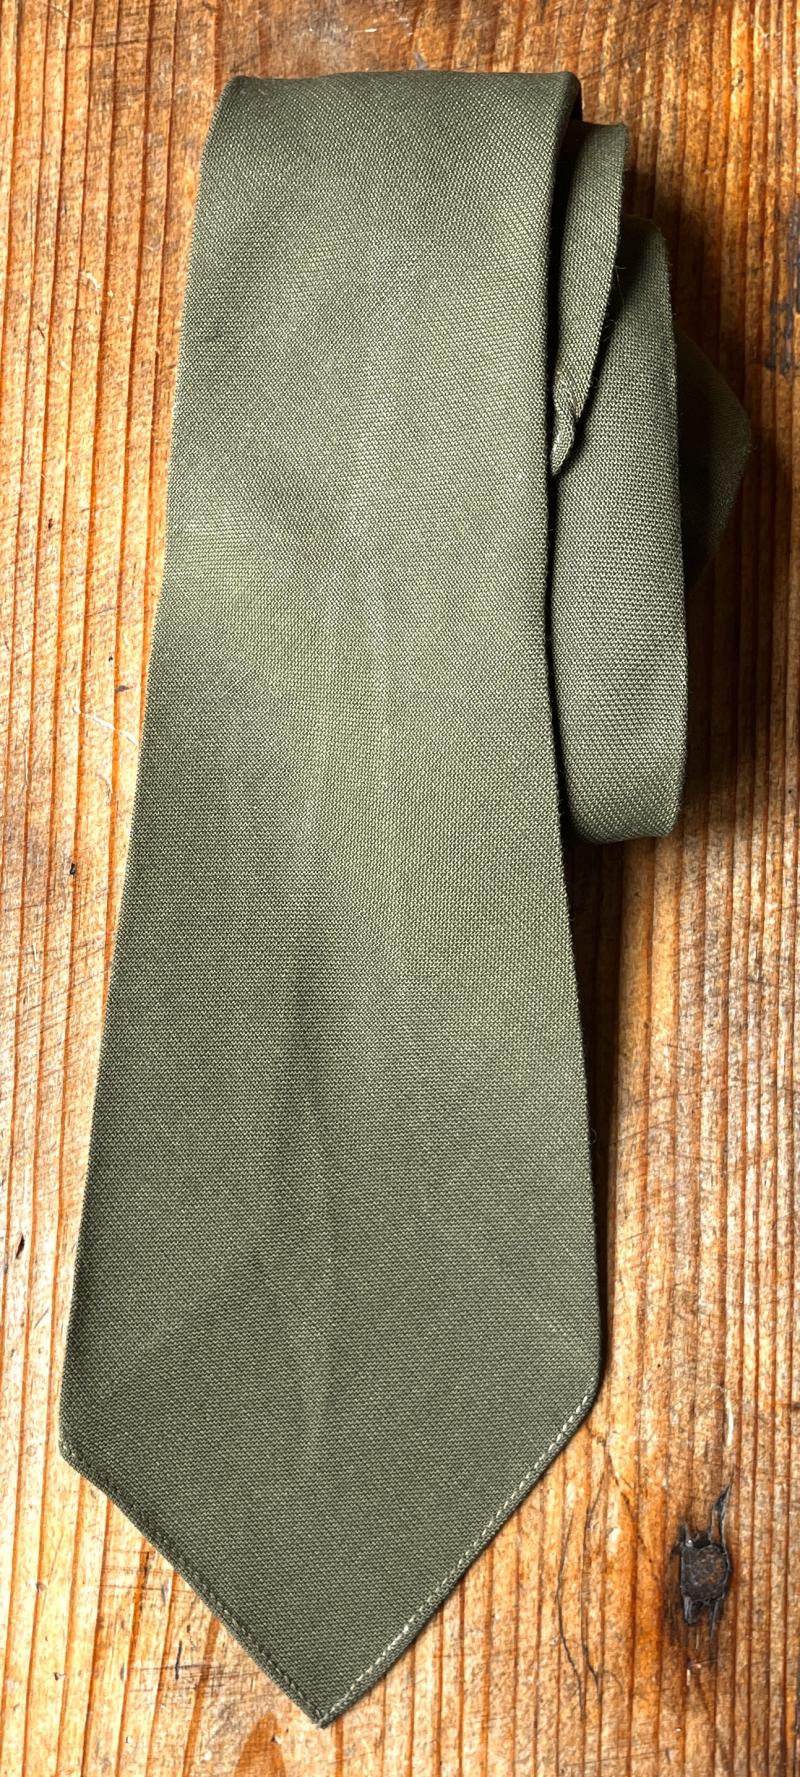 WW2 BRITISH ARMY OFFICERS TIE - ATTRIBUTED